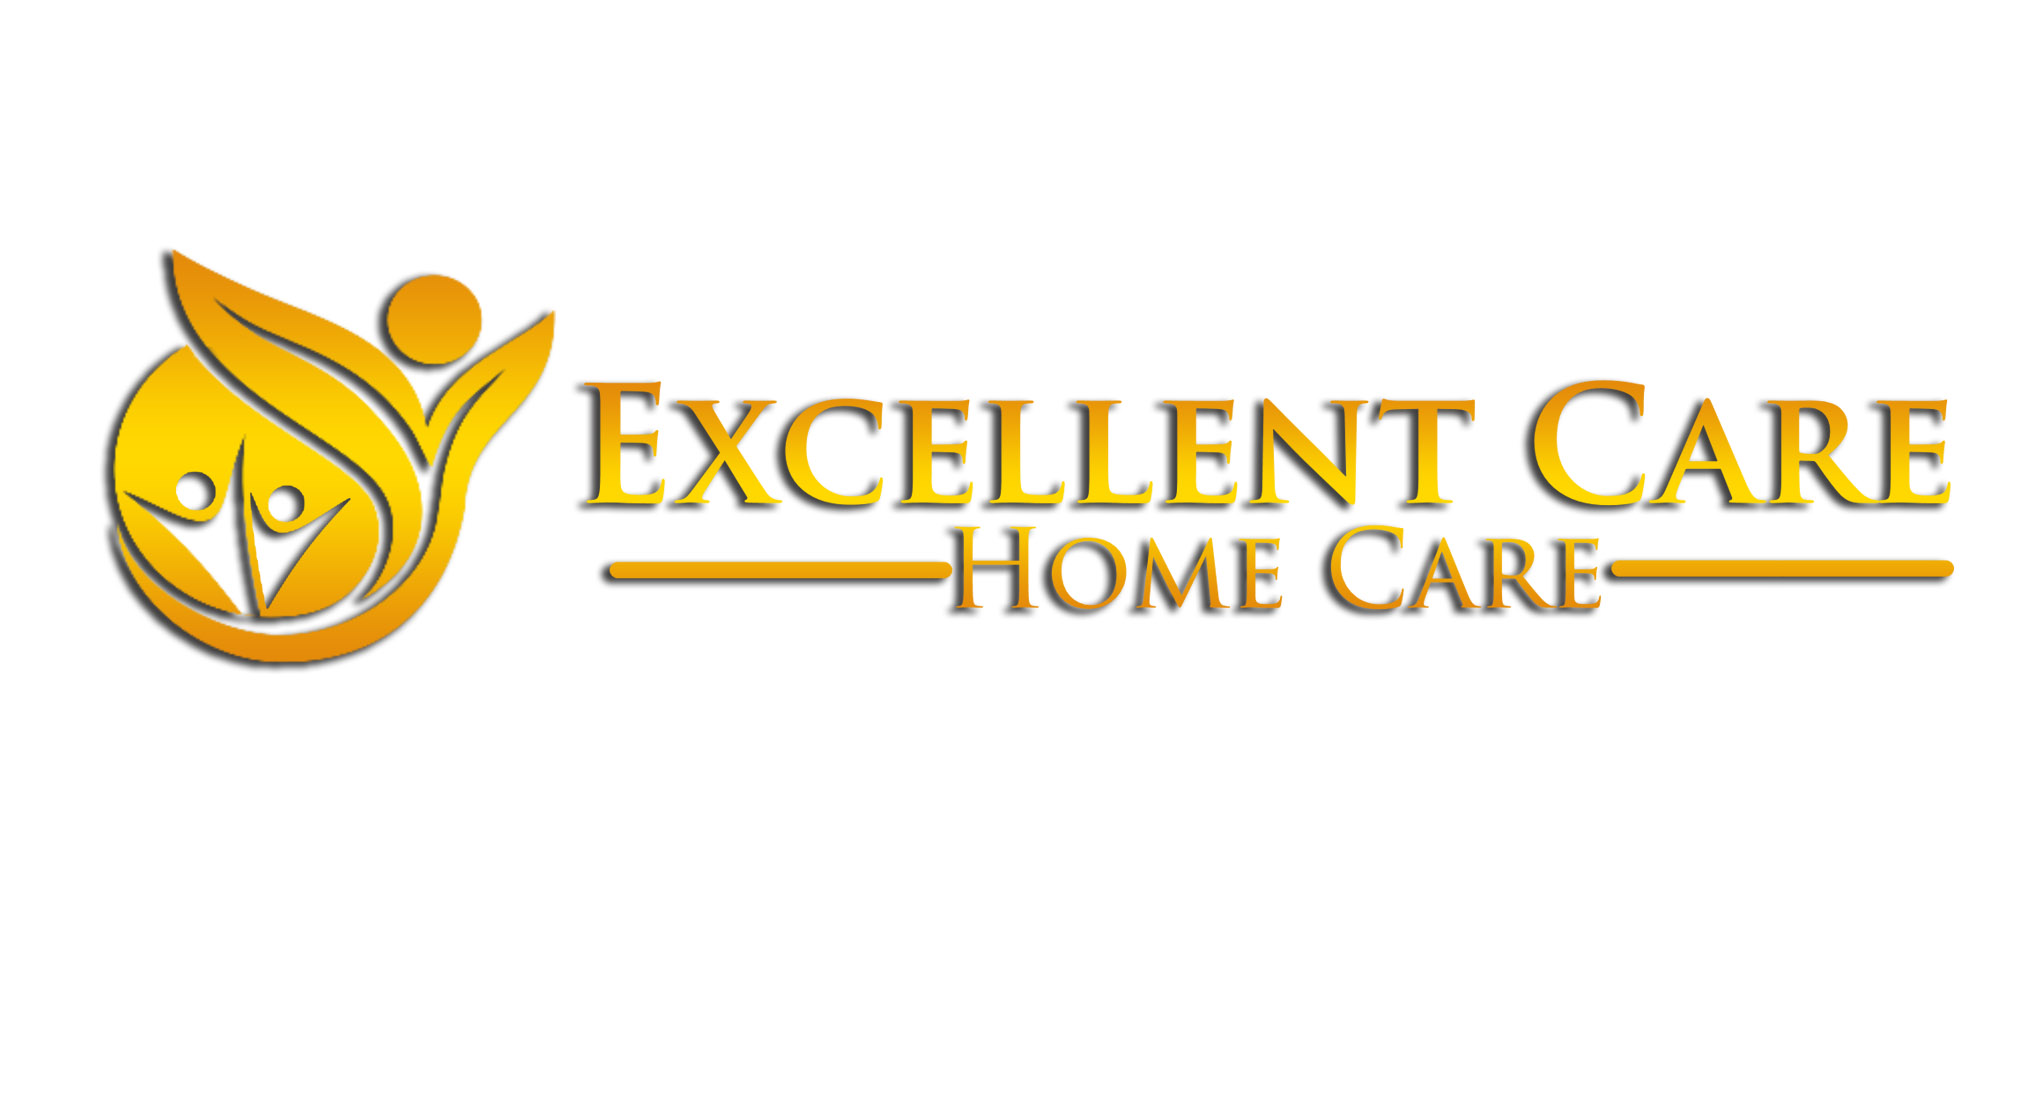 Excellent Care Home Care